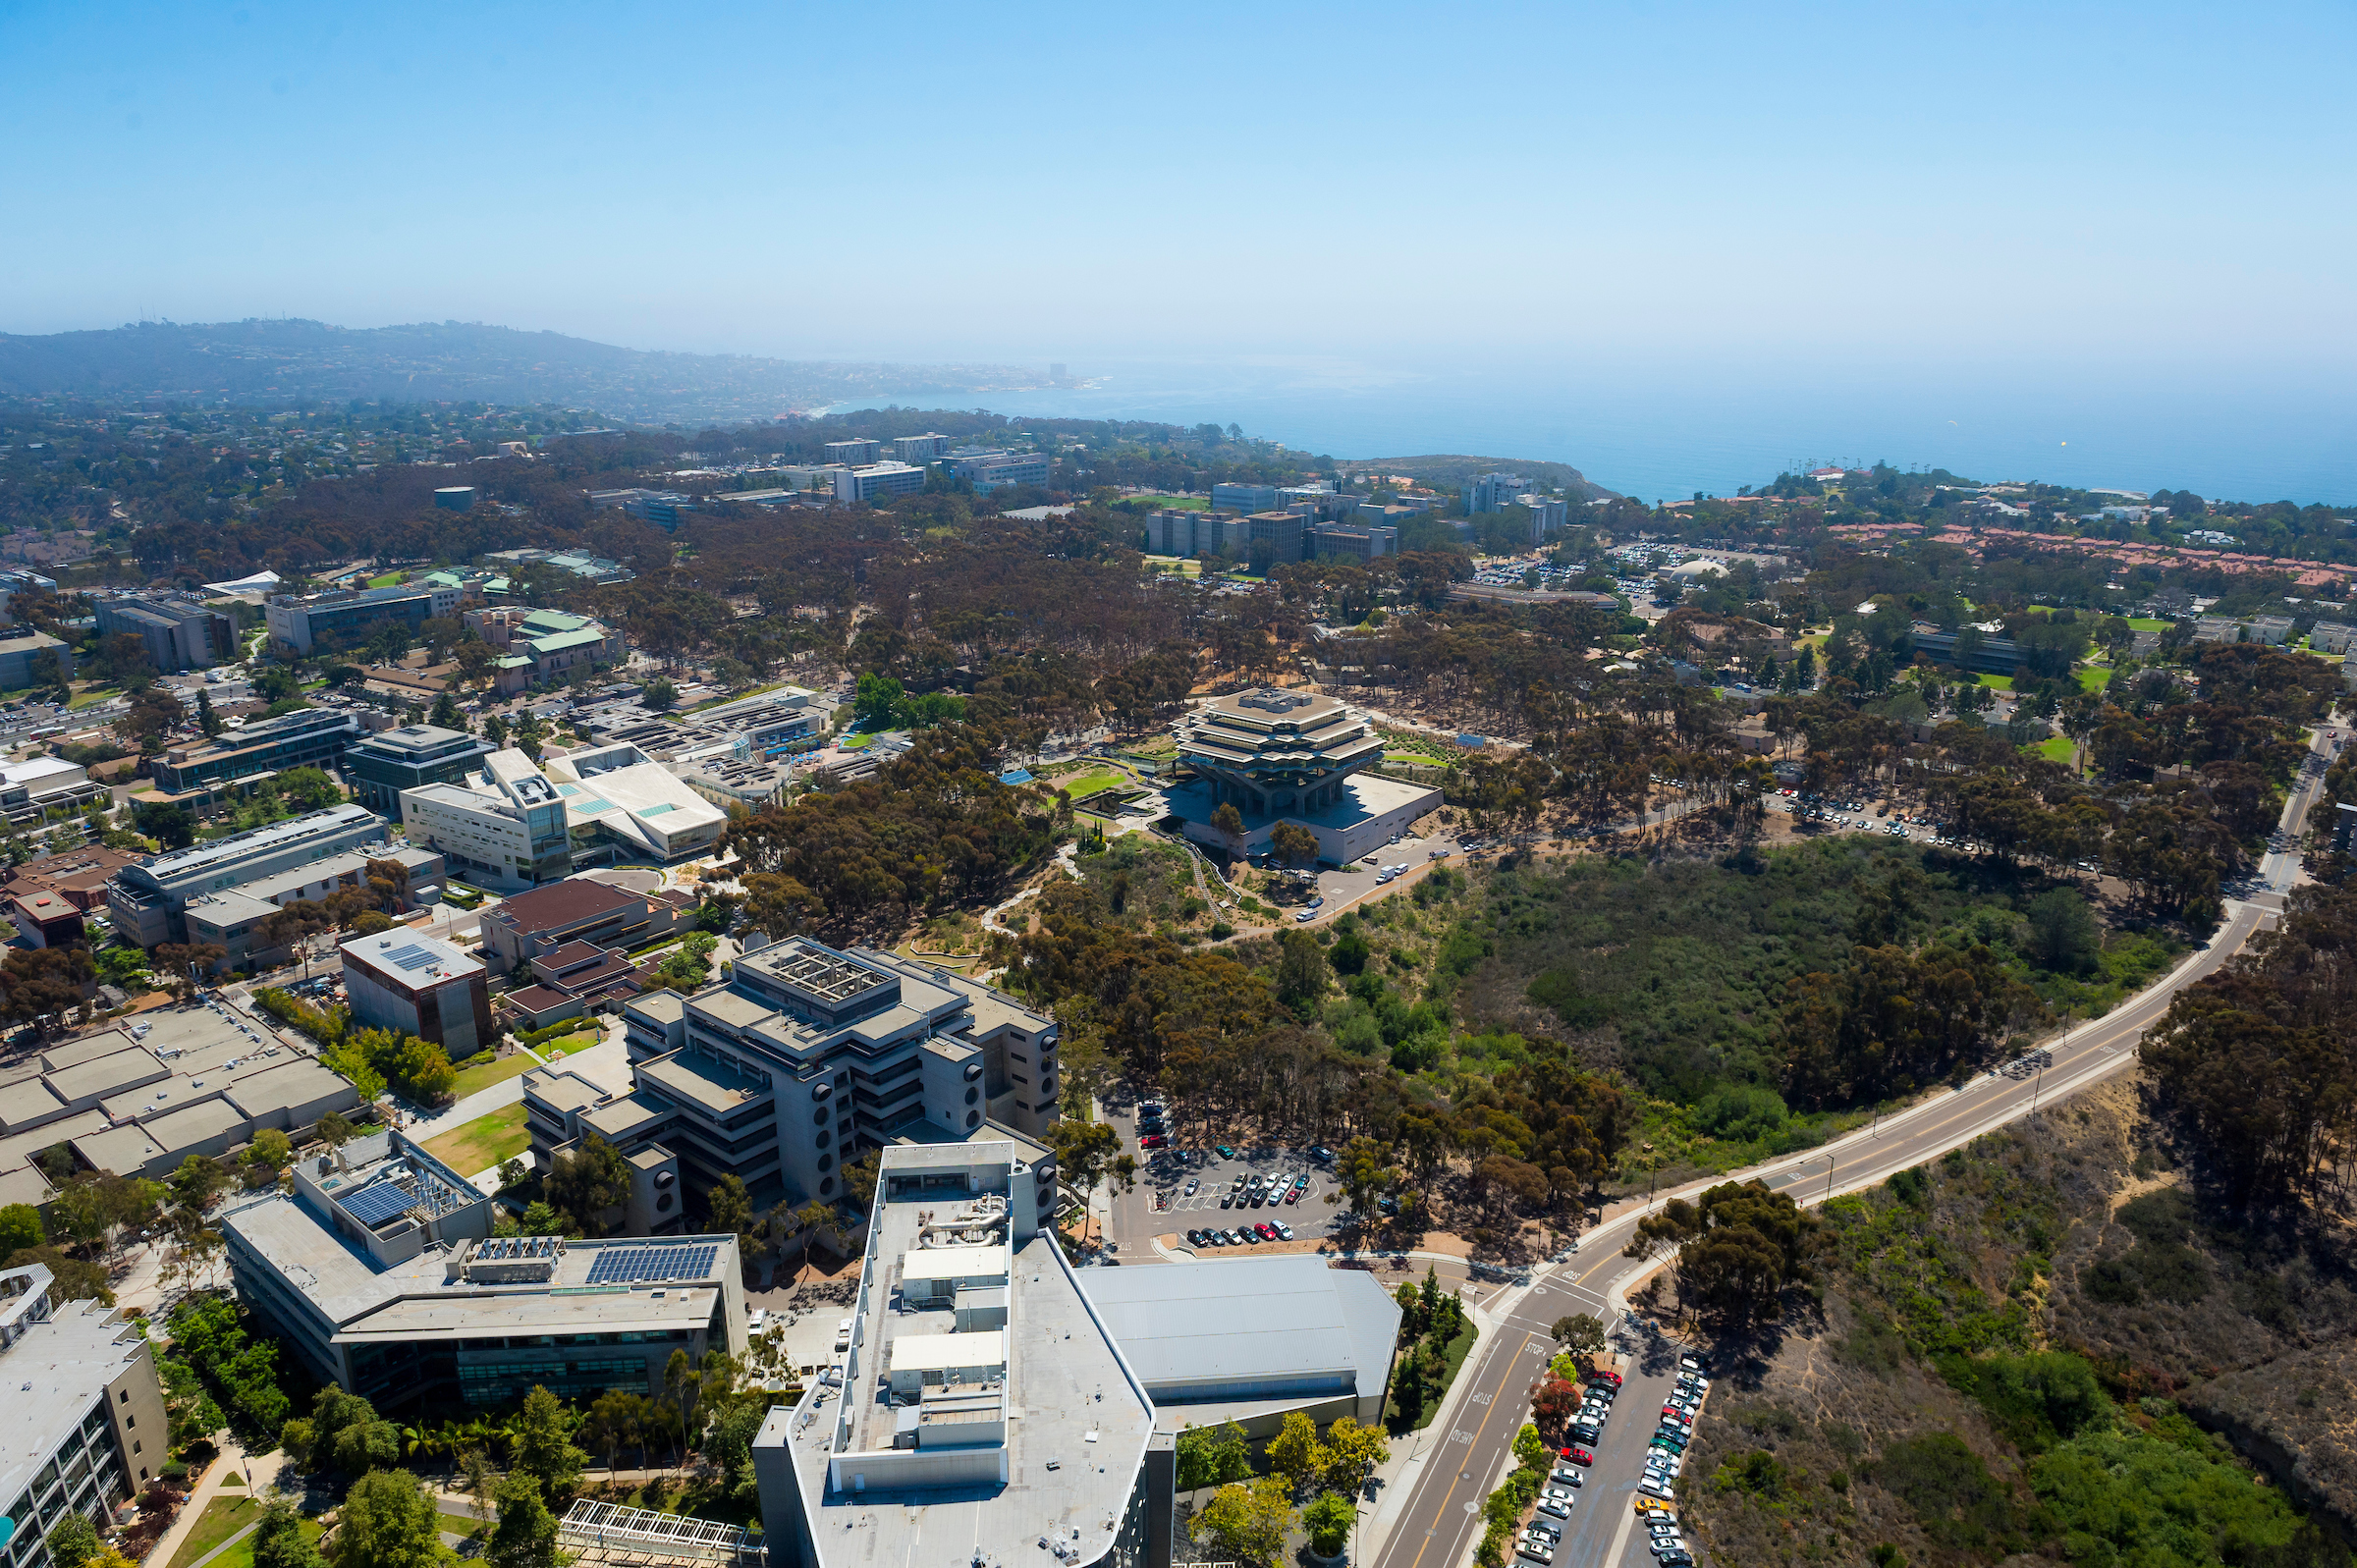 arial view to the west campus with Geisel library at the center